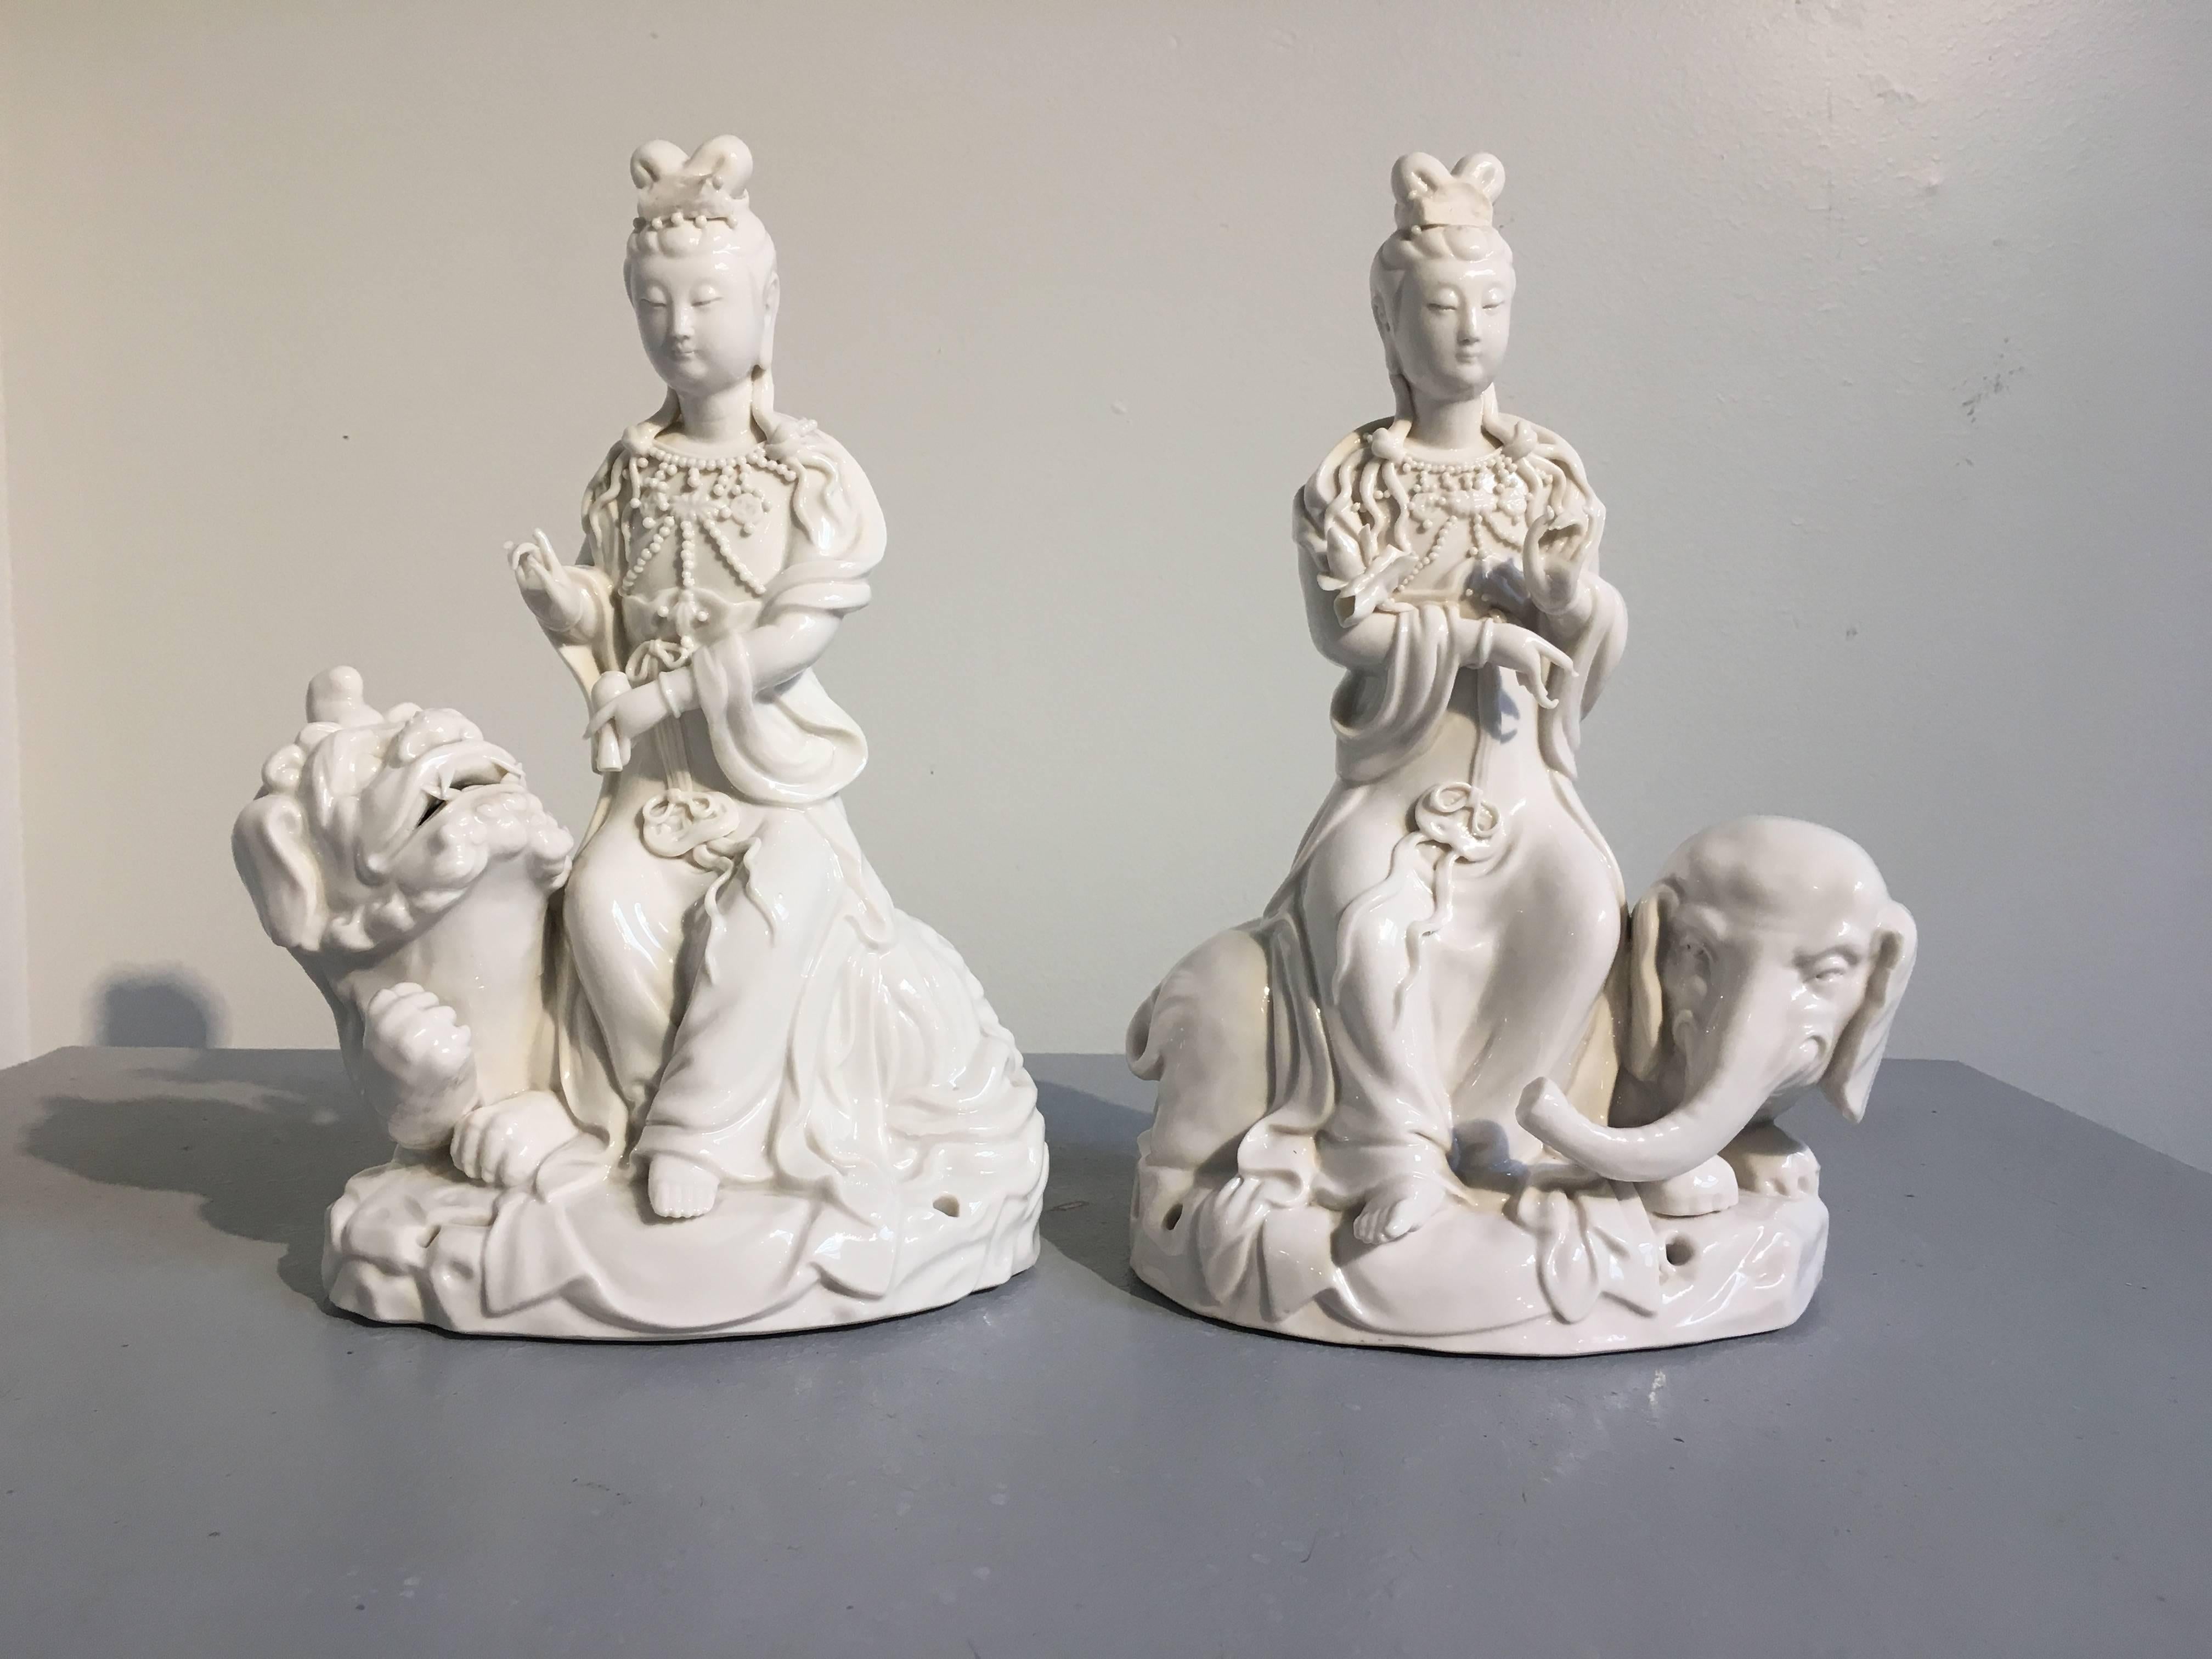 A lovely pair of Chinese Blanc de Chine figures of Guanyin (Avalokiteshvara) seated upon animals, Republic Period, circa 1930s.
Guanyin, the Bodhisattva of mercy and compassion is portrayed as a matronly figure, dressed in voluminous robes and